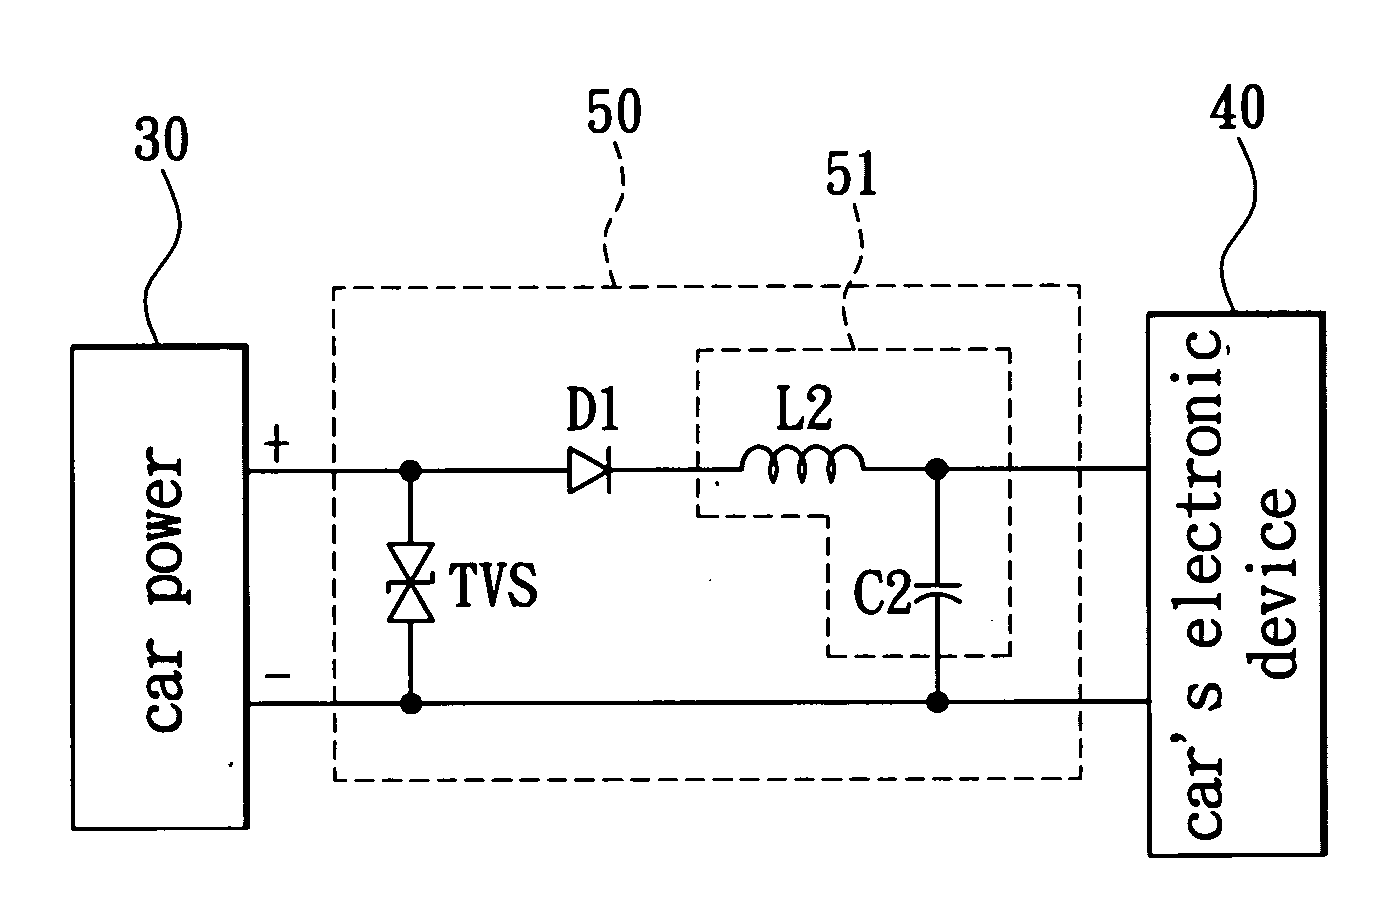 Protection circuit for electric power of a car